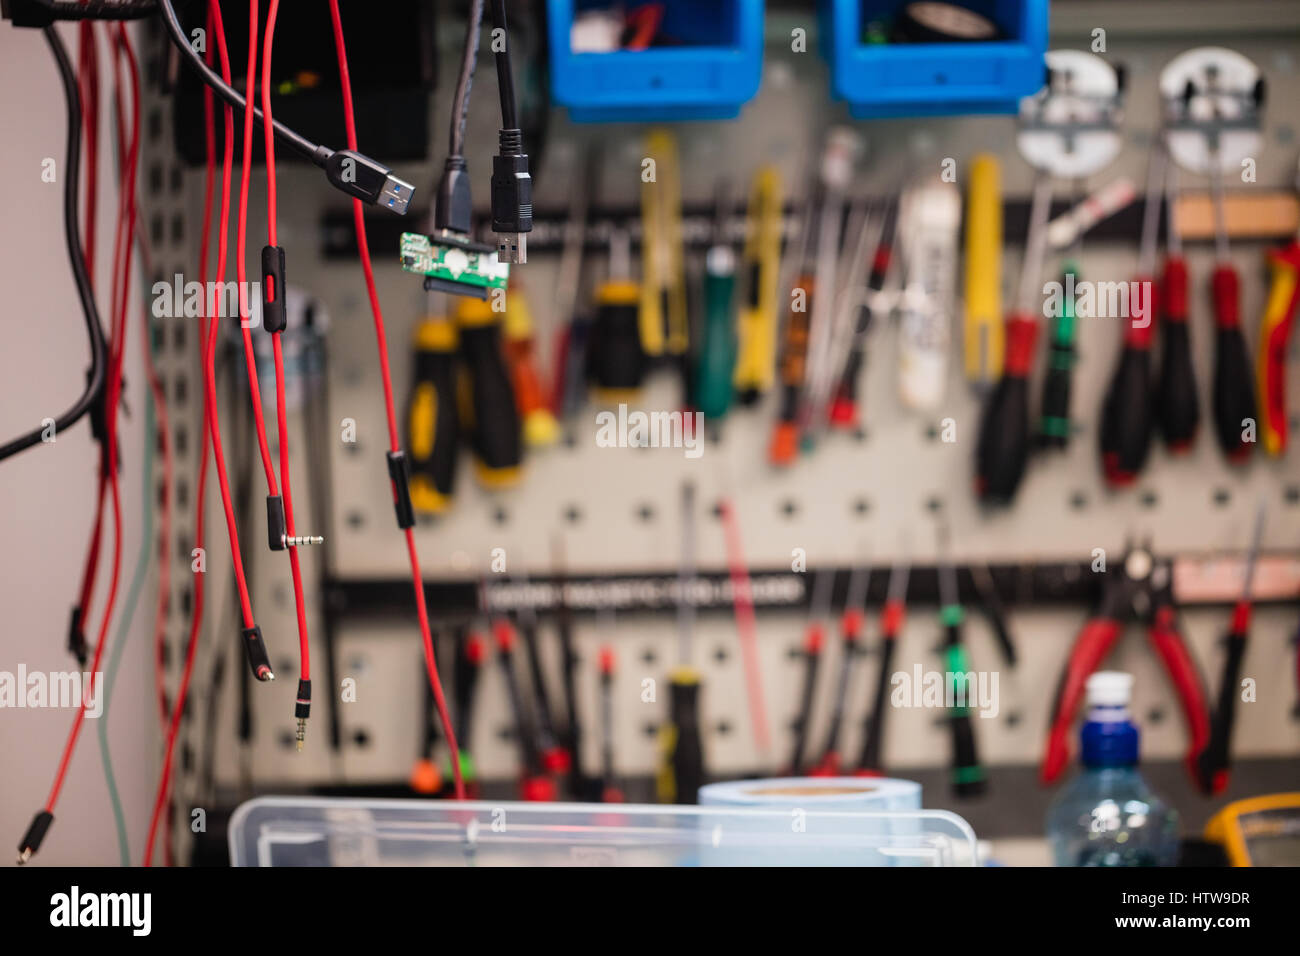 Data cables hanging in repair shop Stock Photo